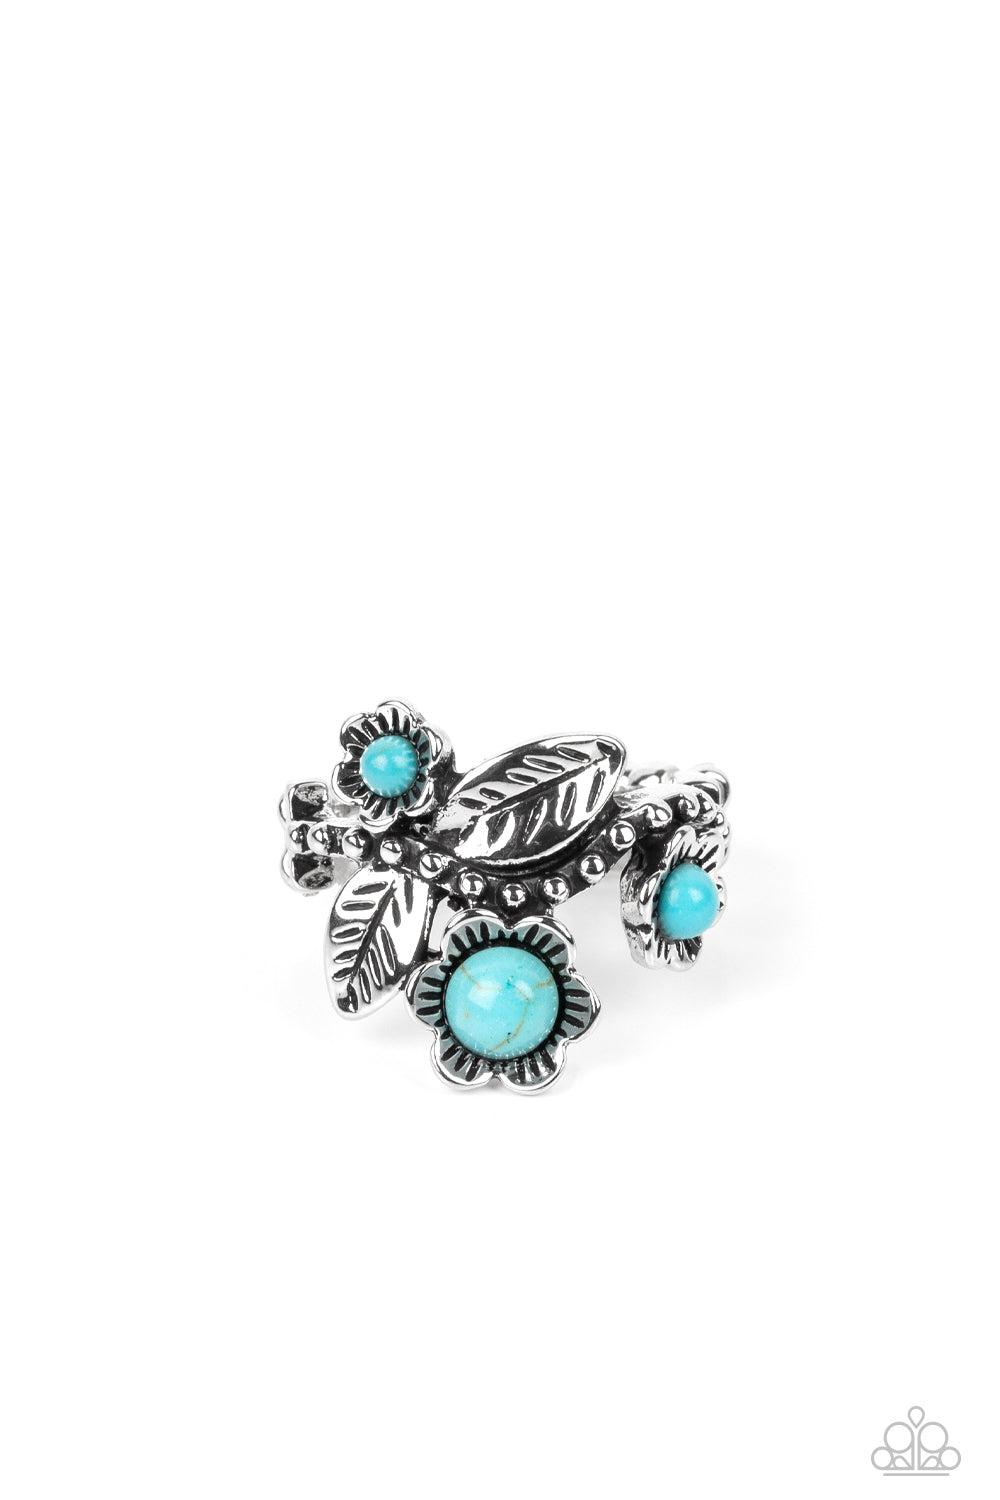 Wonderland Wildflower Turquoise Blue Stone Ring - Paparazzi Accessories- lightbox - CarasShop.com - $5 Jewelry by Cara Jewels